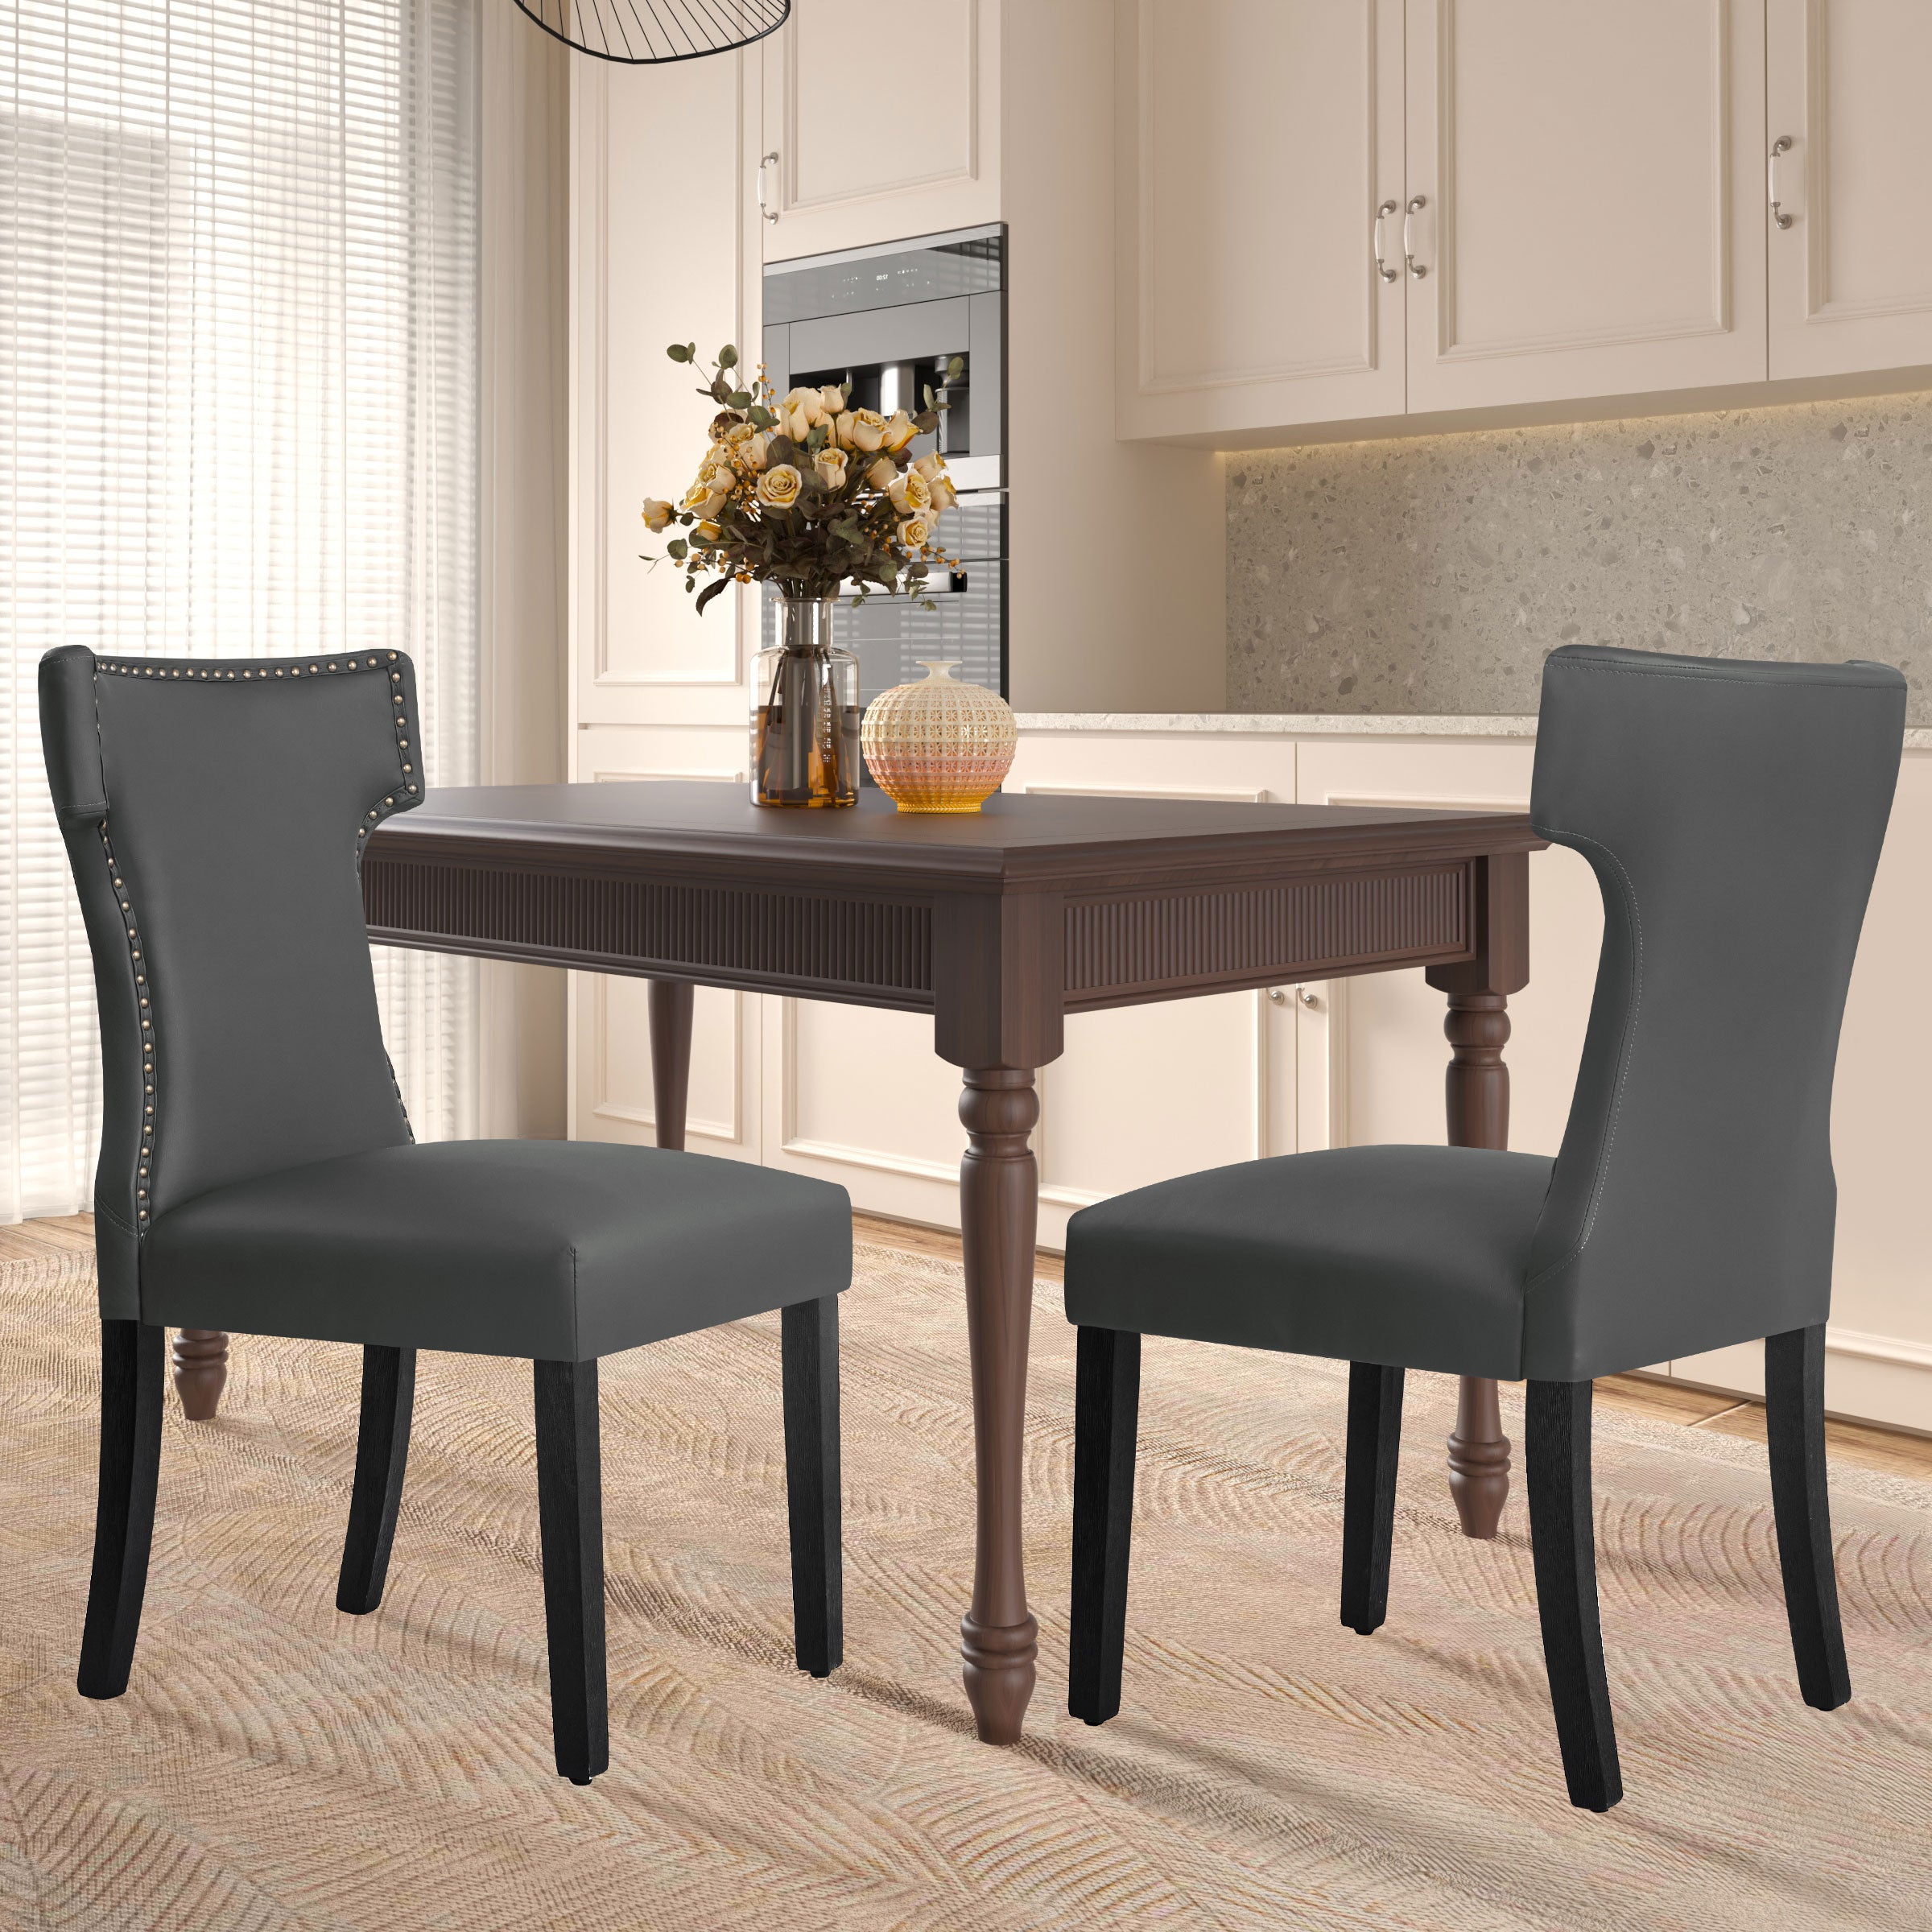 Wingback Dining Chair Hourglass Back Faux Leather Dining Chairs (Set of 2)